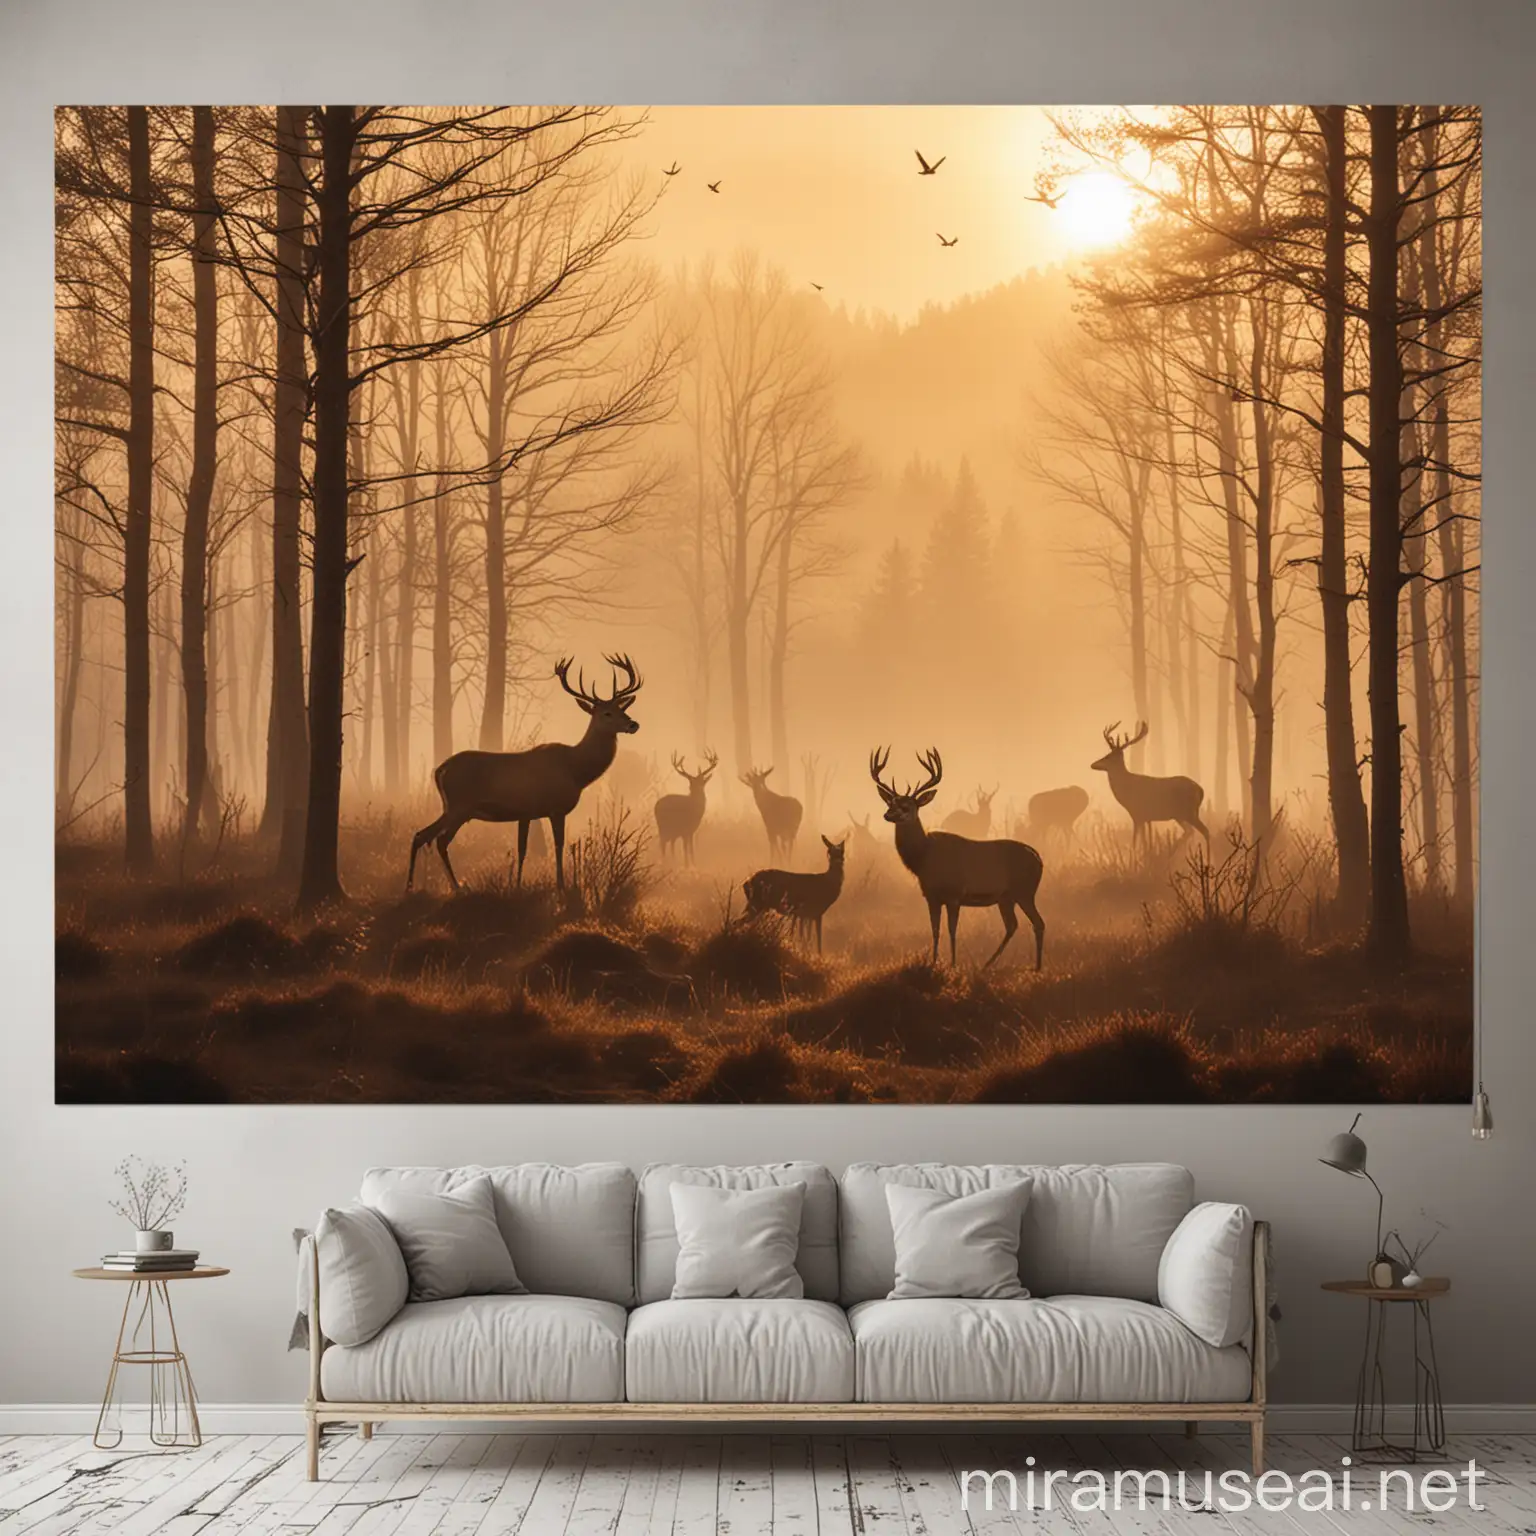 Majestic Deer in Foggy Forest with Mountain View and Birds at Sunset